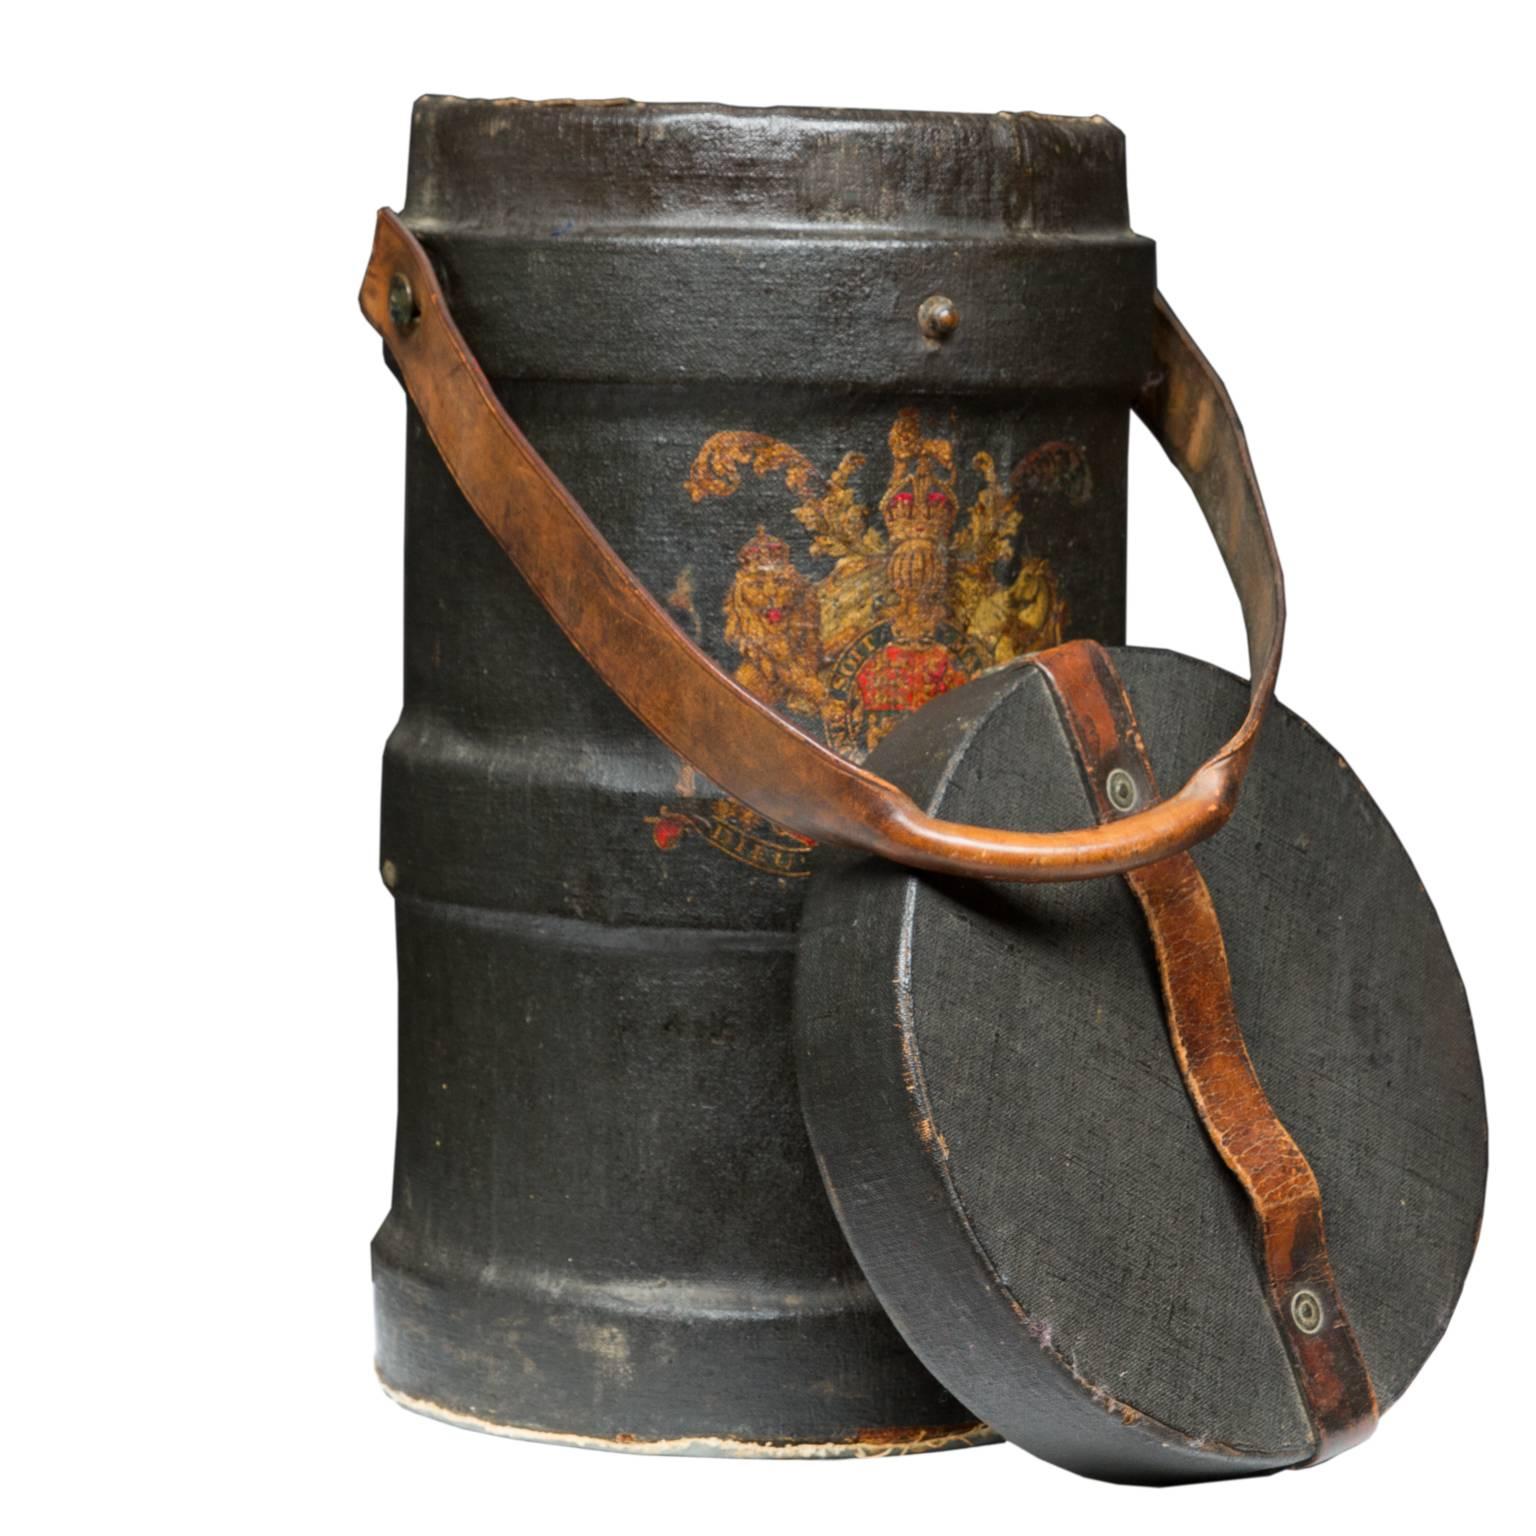 A handsome 19th century English cordite case with leather carries strap, lid, and a coat of arms on the front. Nice heavy strap for carrying and top leather strap. No locking strap has been broken off. Made of painted canvas. Very nice quality.